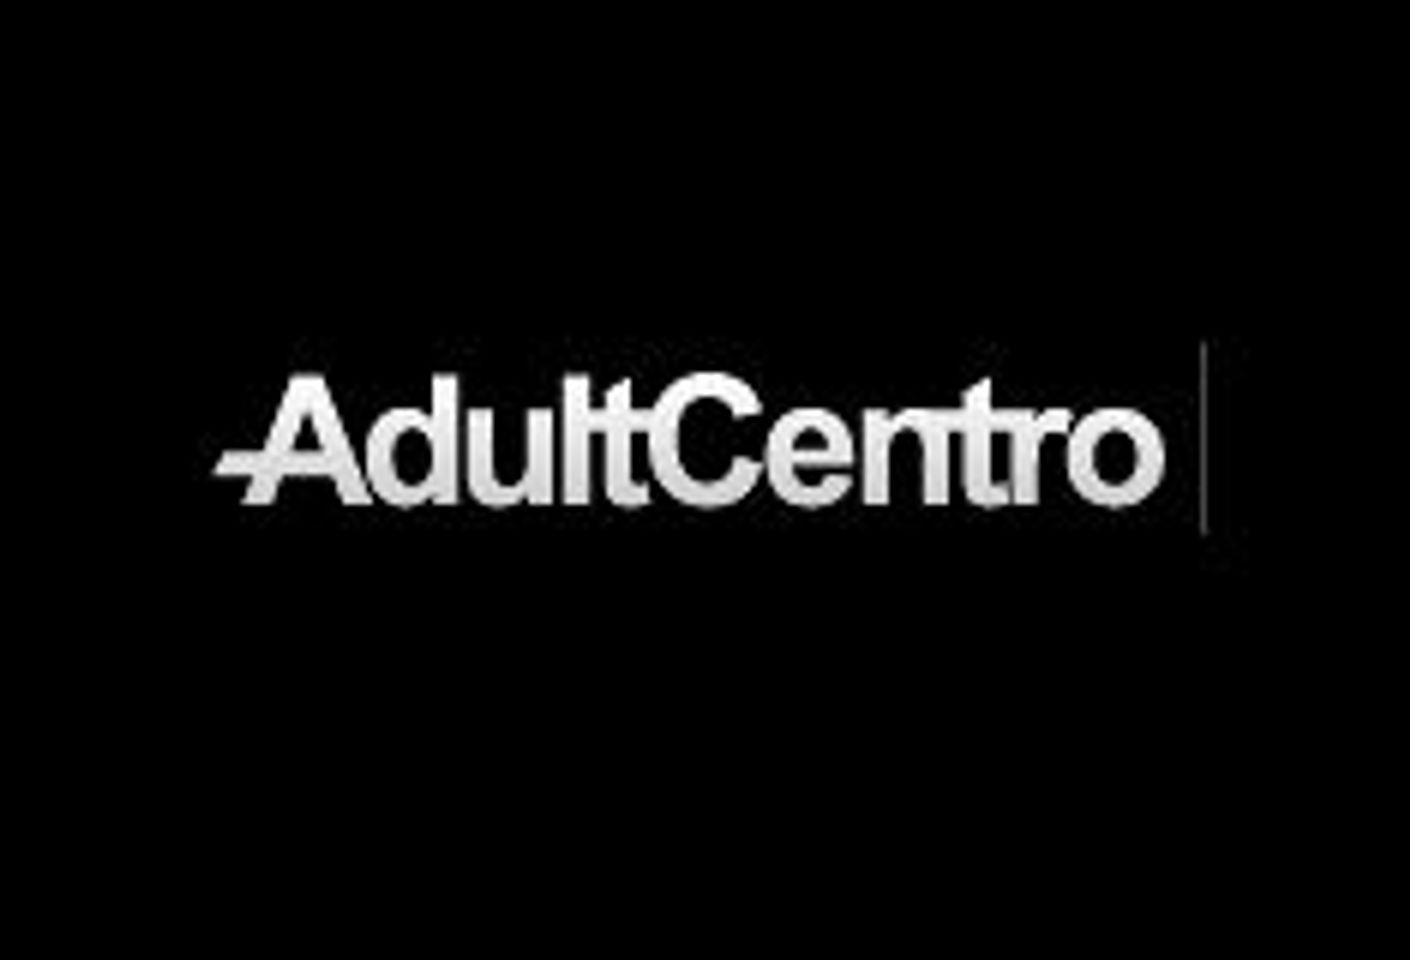 AdultCentro Easter Promo Live Through April 24